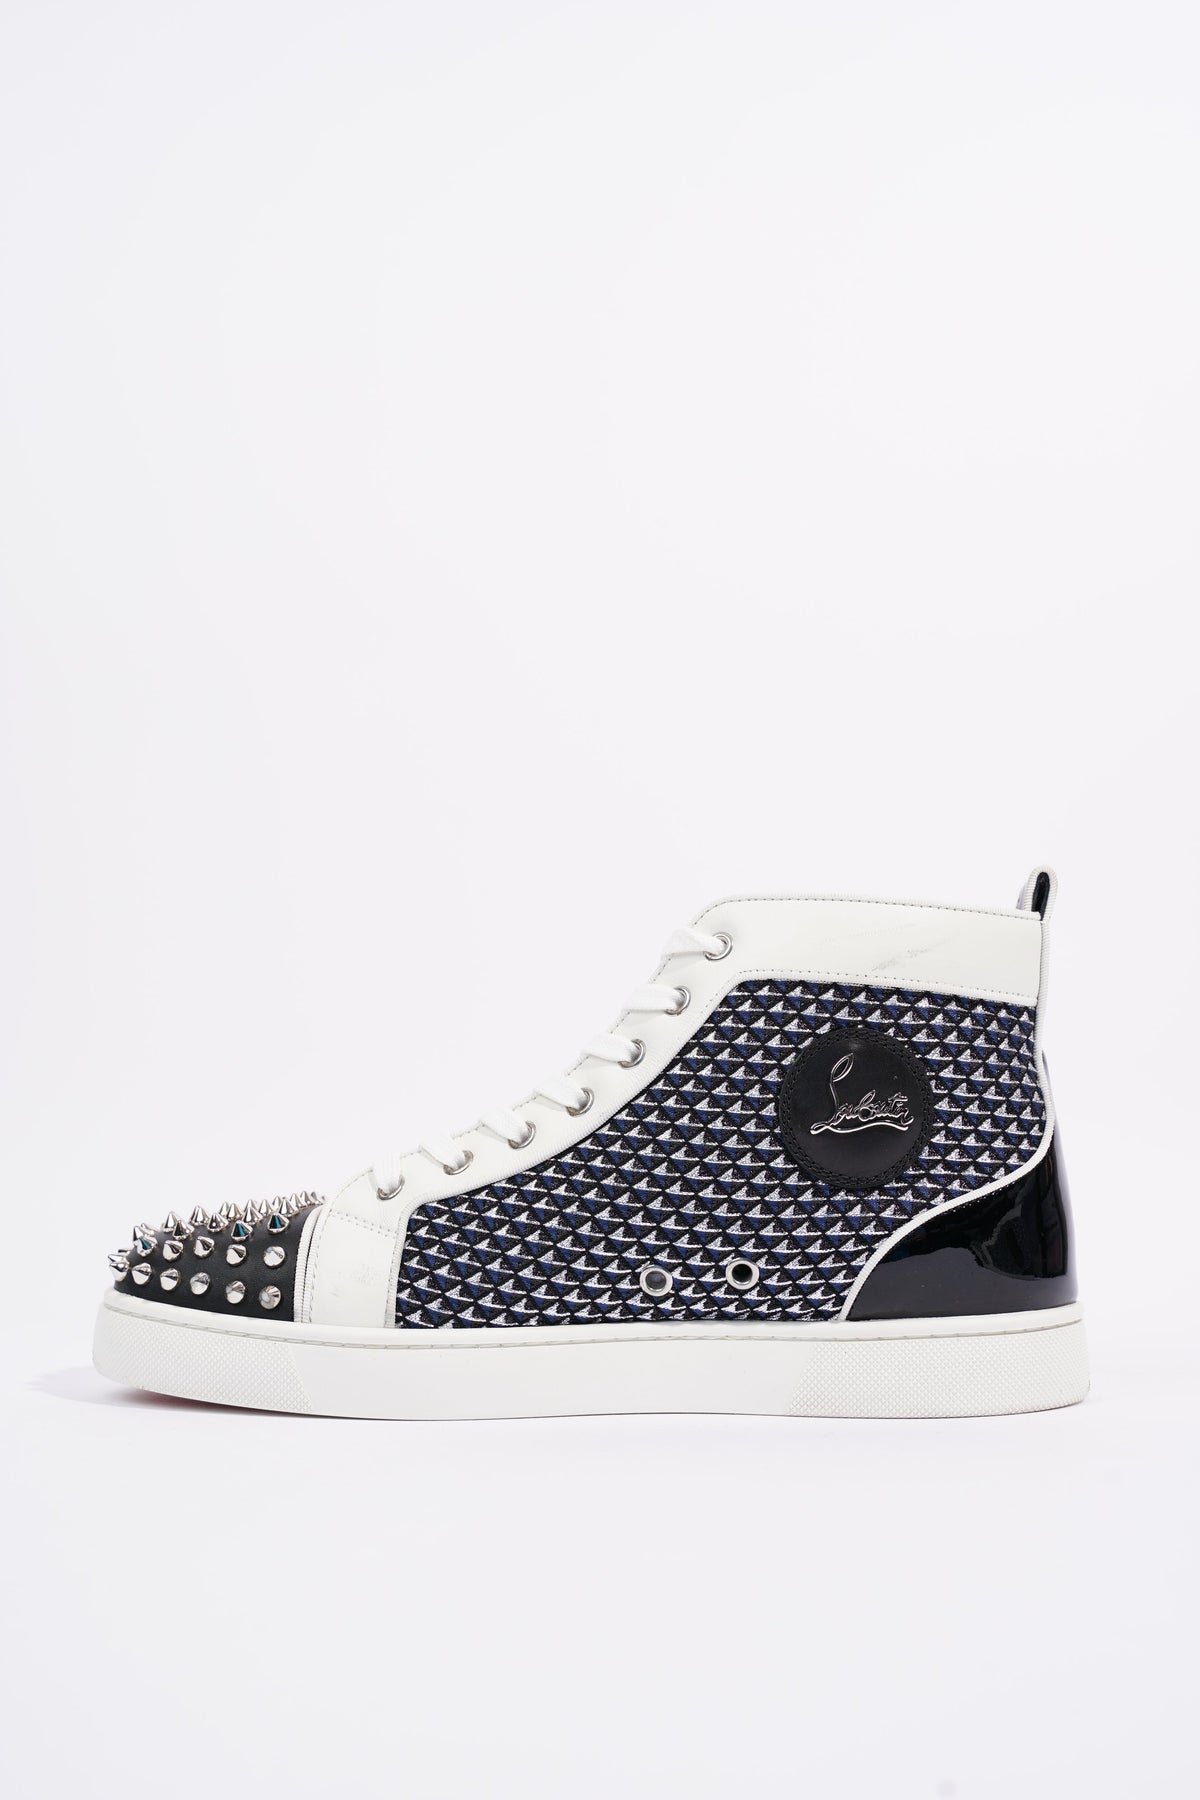 Christian Louboutin Lou Spikes Suede Sneakers - Black - 41.5